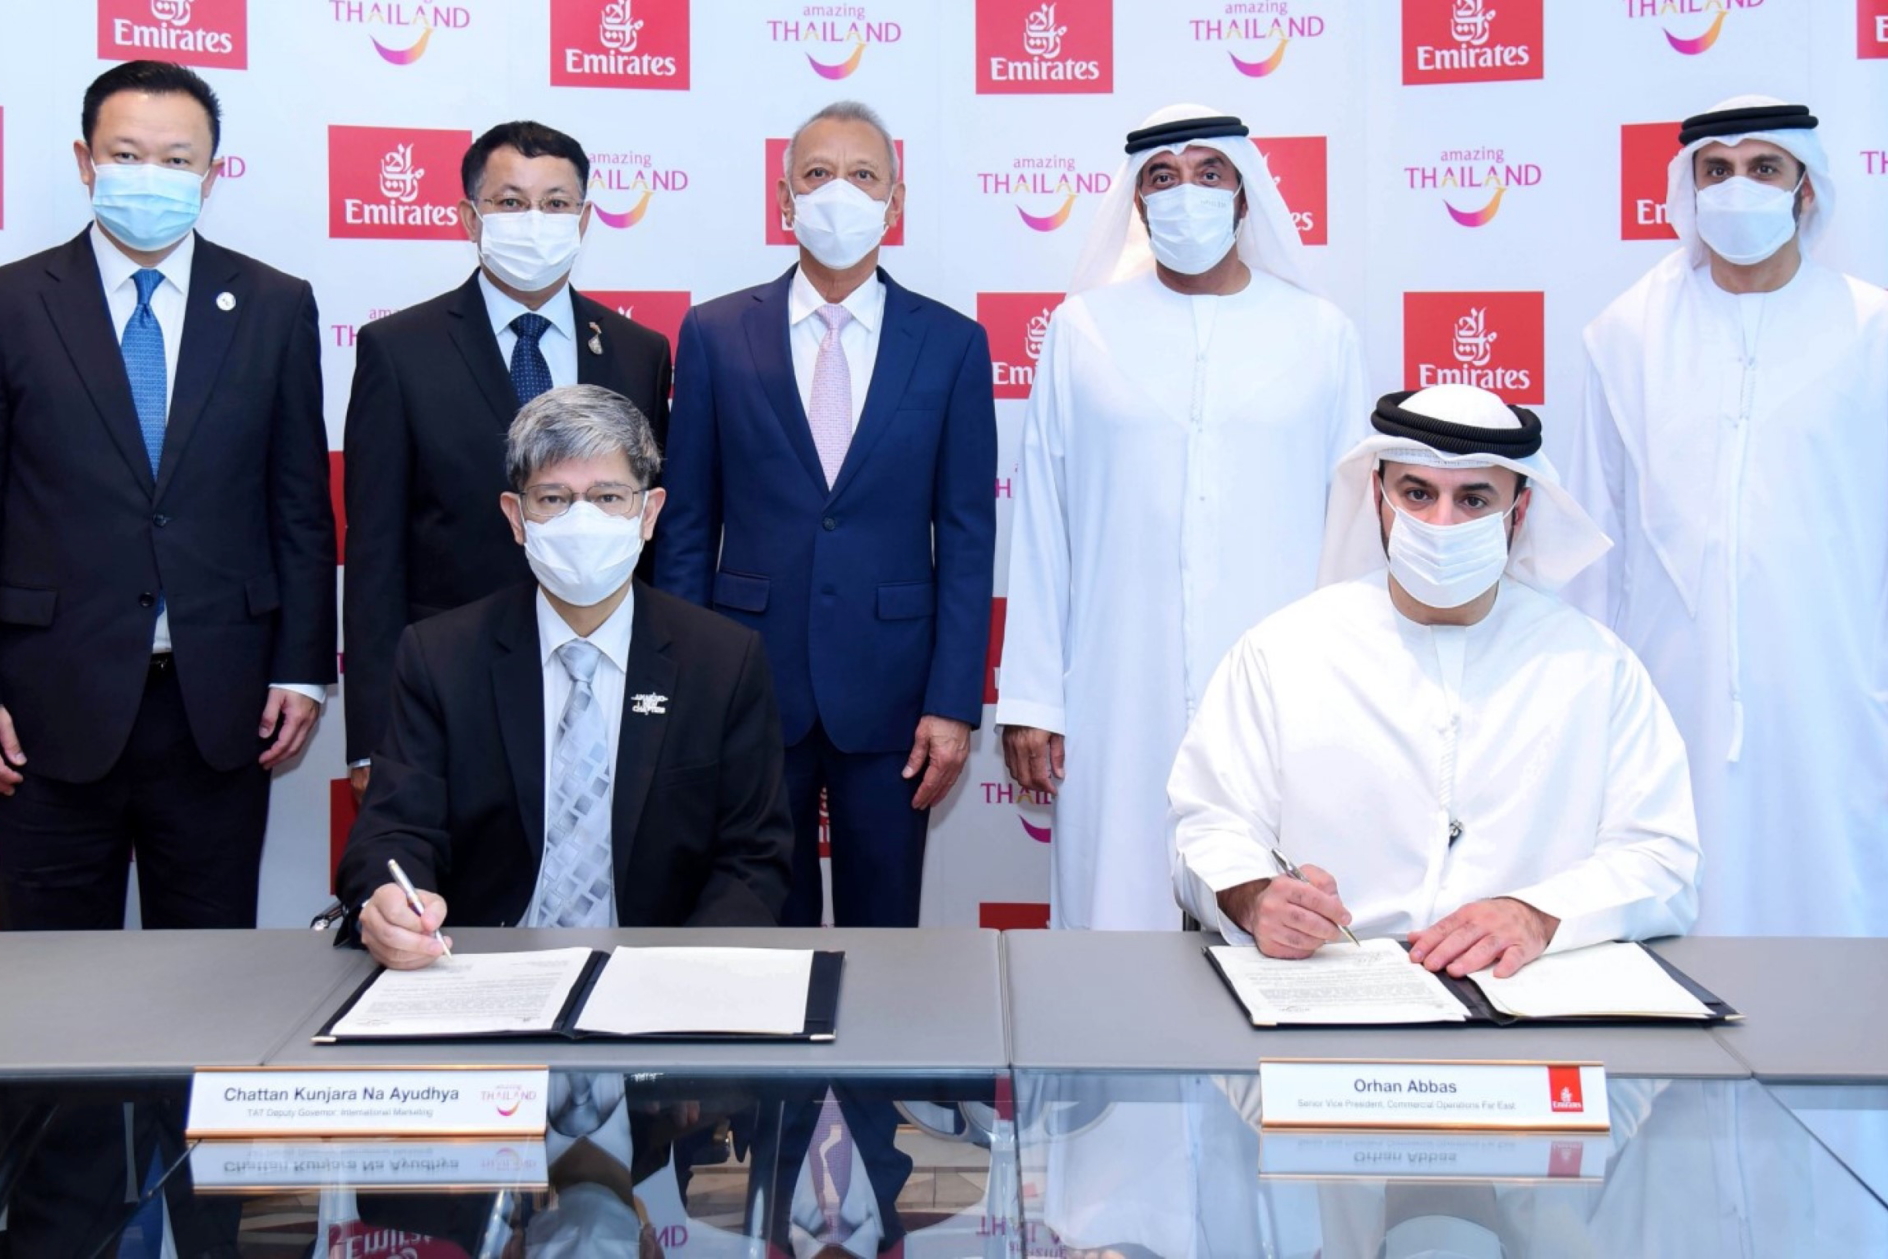 The MOC was signed by Orhan Abbas, Senior Vice President of Commercial Operations – Far East at Emirates and Chattan Kunjara Na Ayudhya, Deputy Governor for International Marketing (Europe, Africa, Middle East and Americas), in the presence of HH Sheikh Ahmed bin Saeed Al Maktoum, Emirates Group Chairman and HE Phiphat Ratchakitprakarn, Thailand’s Minister of Tourism and Sports. Also present at the signing ceremony were Yuthasak Supasorn, Governor of the Tourism Authority of Thailand, HE Chairat Sirivat, Consul-General of Thailand to the UAE and Adnan Kazim, Chief Commercial Officer, Emirates. Click to enlarge.